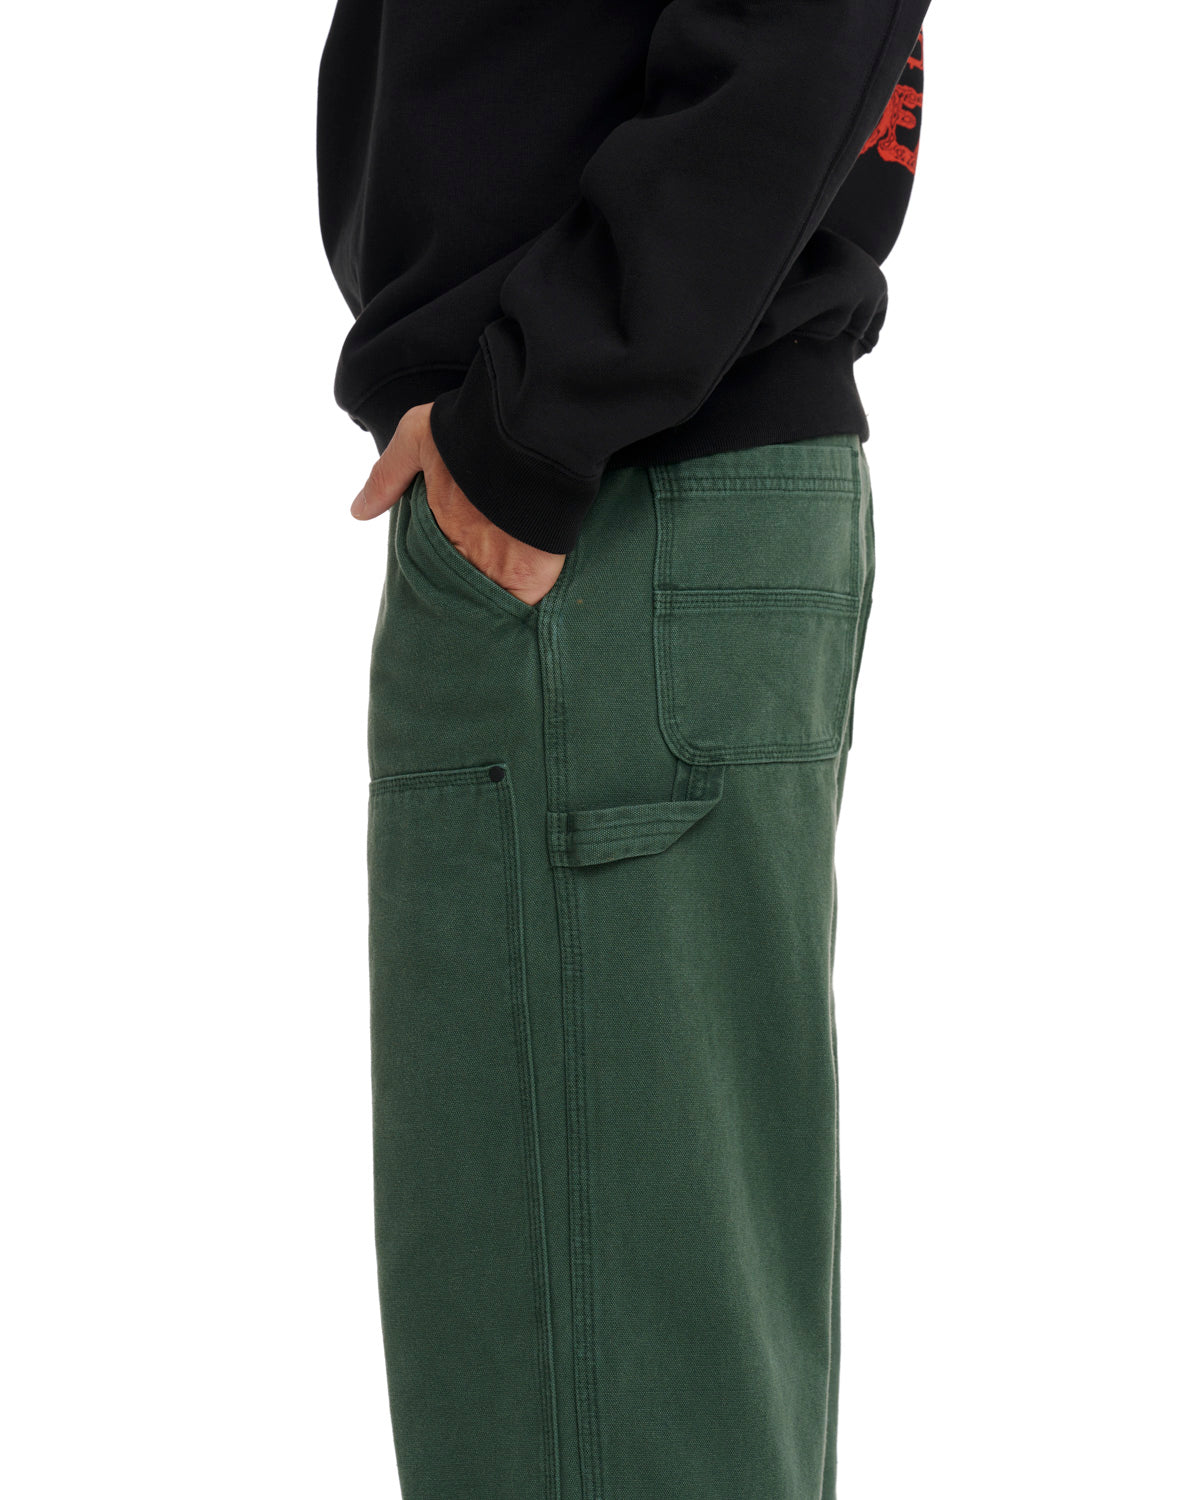 Double Knee Utility Pant - Putty Green 5